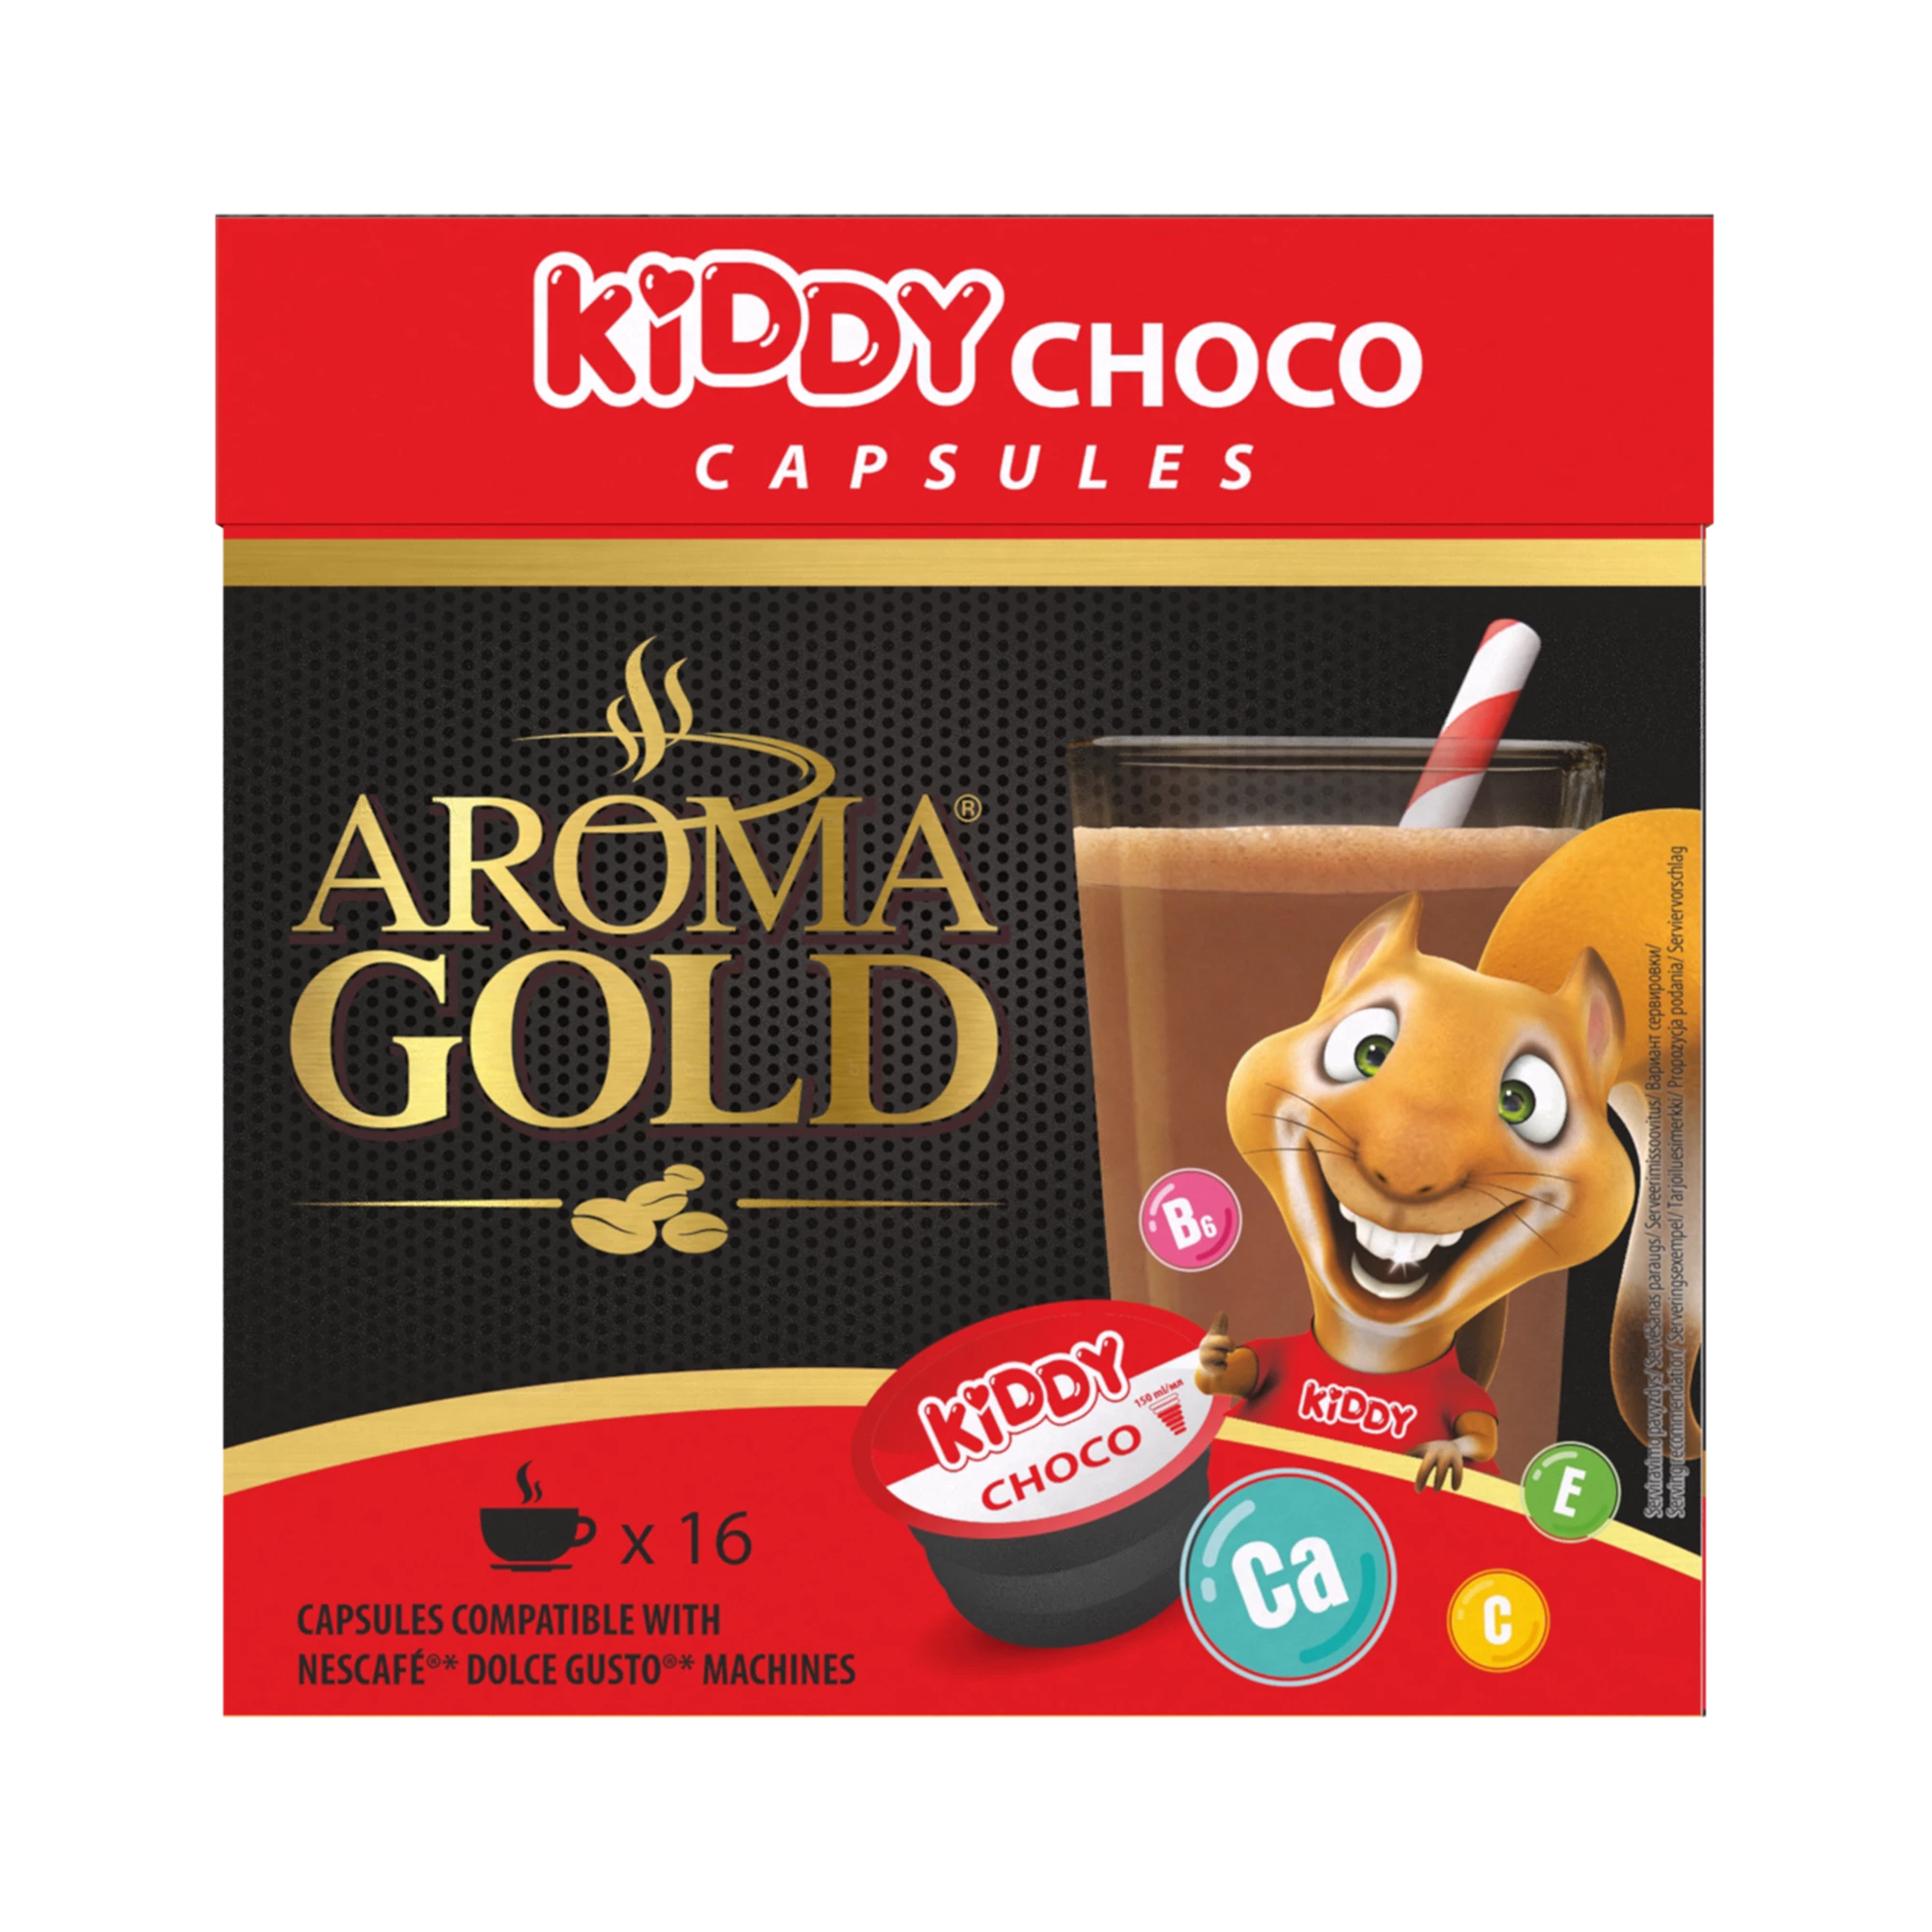 Capsules "kiddy Cacao"  Compatible Dolce Gusto X 16 - Aroma Gold